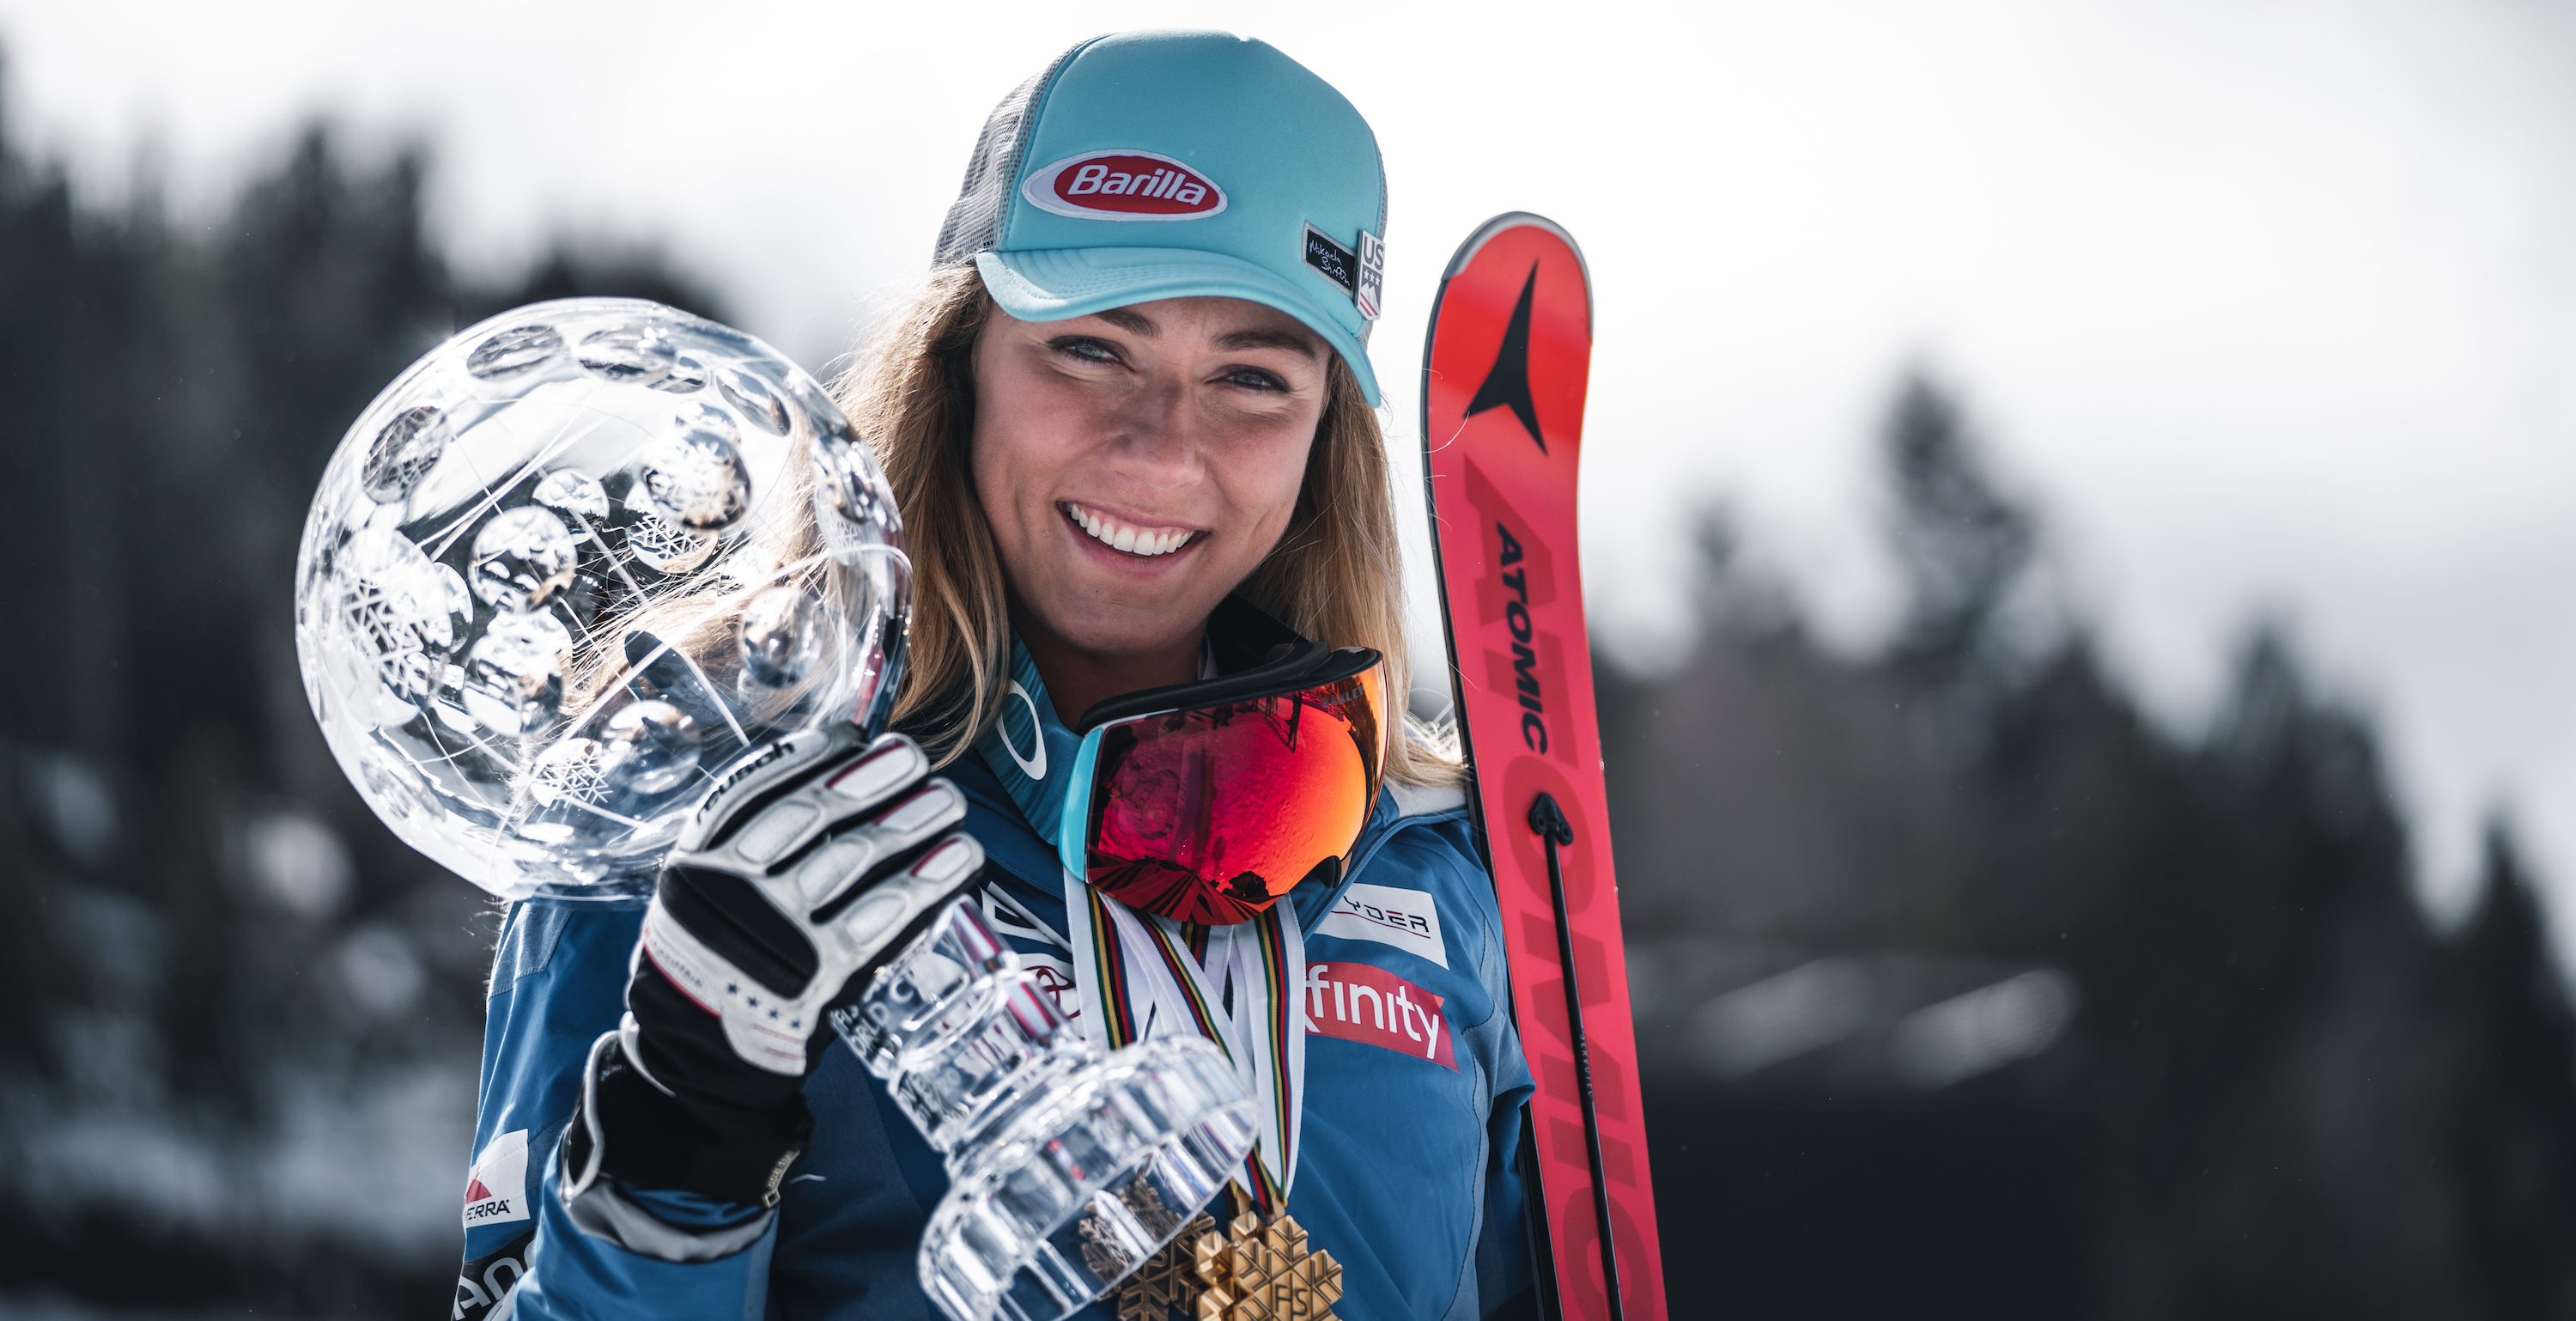 Mikaela Shiffrin First to Reach 1M CHF in Prize Money